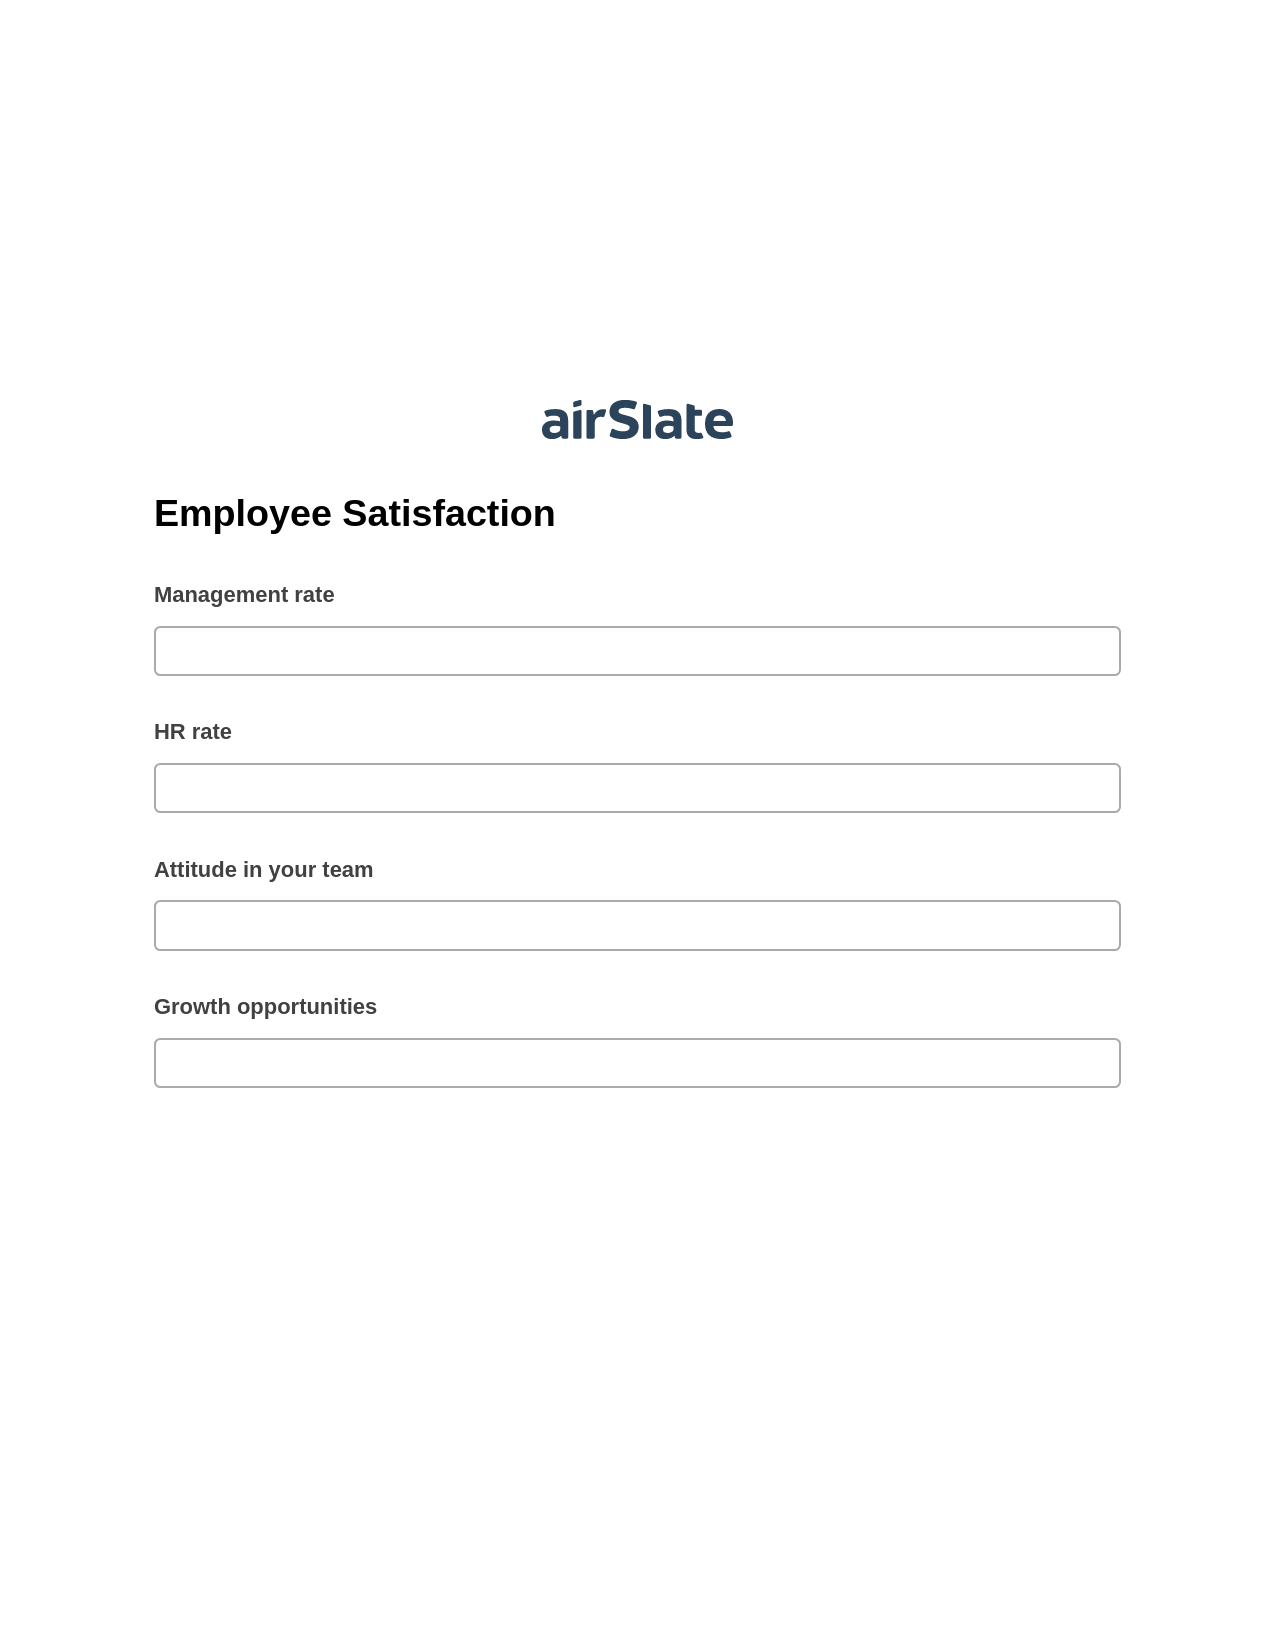 Employee Satisfaction Pre-fill from another Slate Bot, Create NetSuite Records Bot, Export to Google Sheet Bot